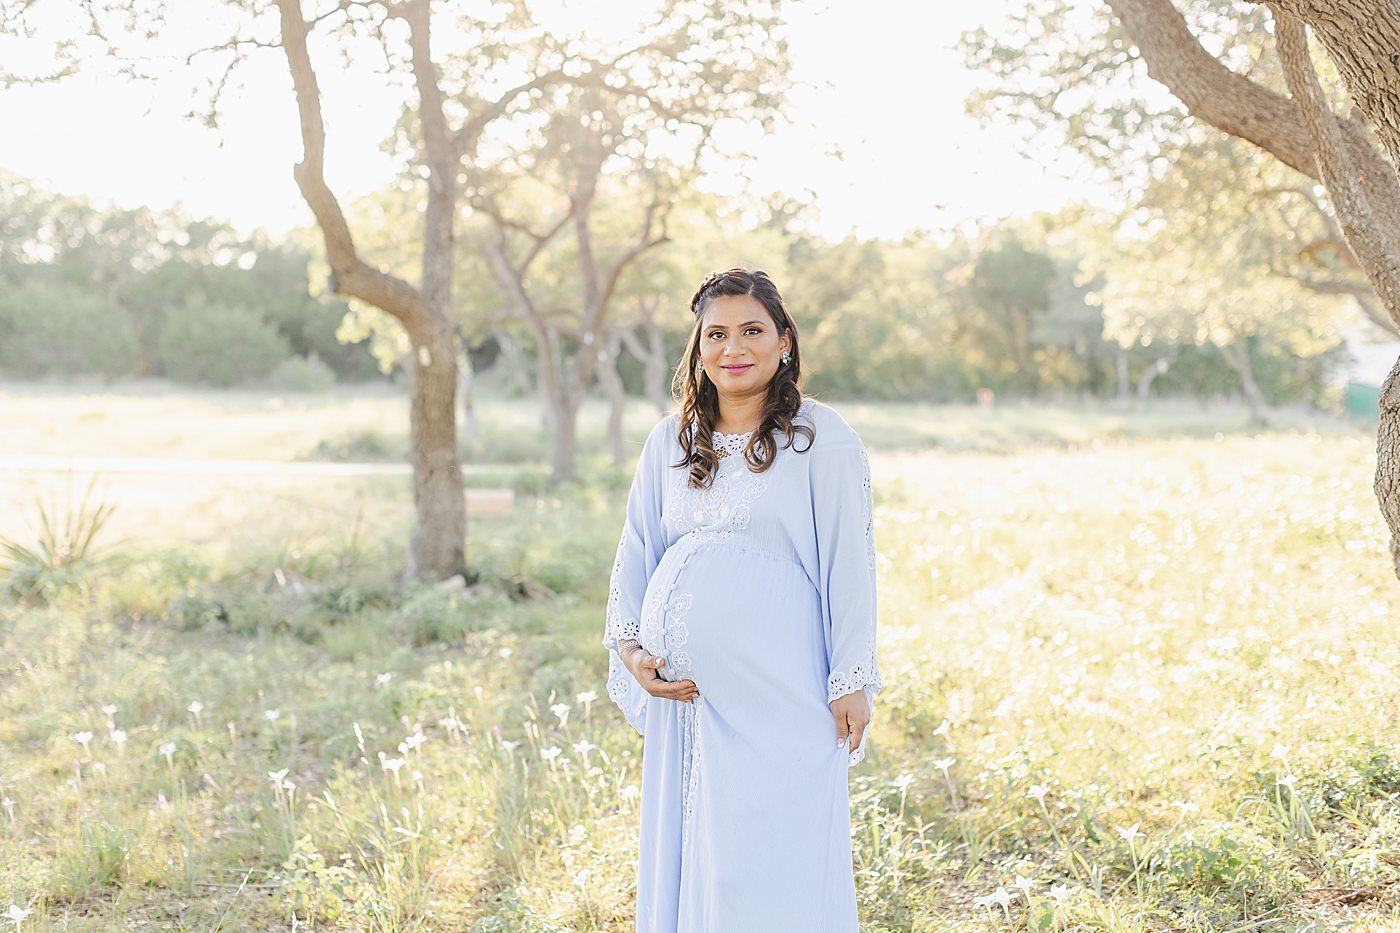 Mom to be in a blue dress in a field | Photo by Sana Ahmed Photography